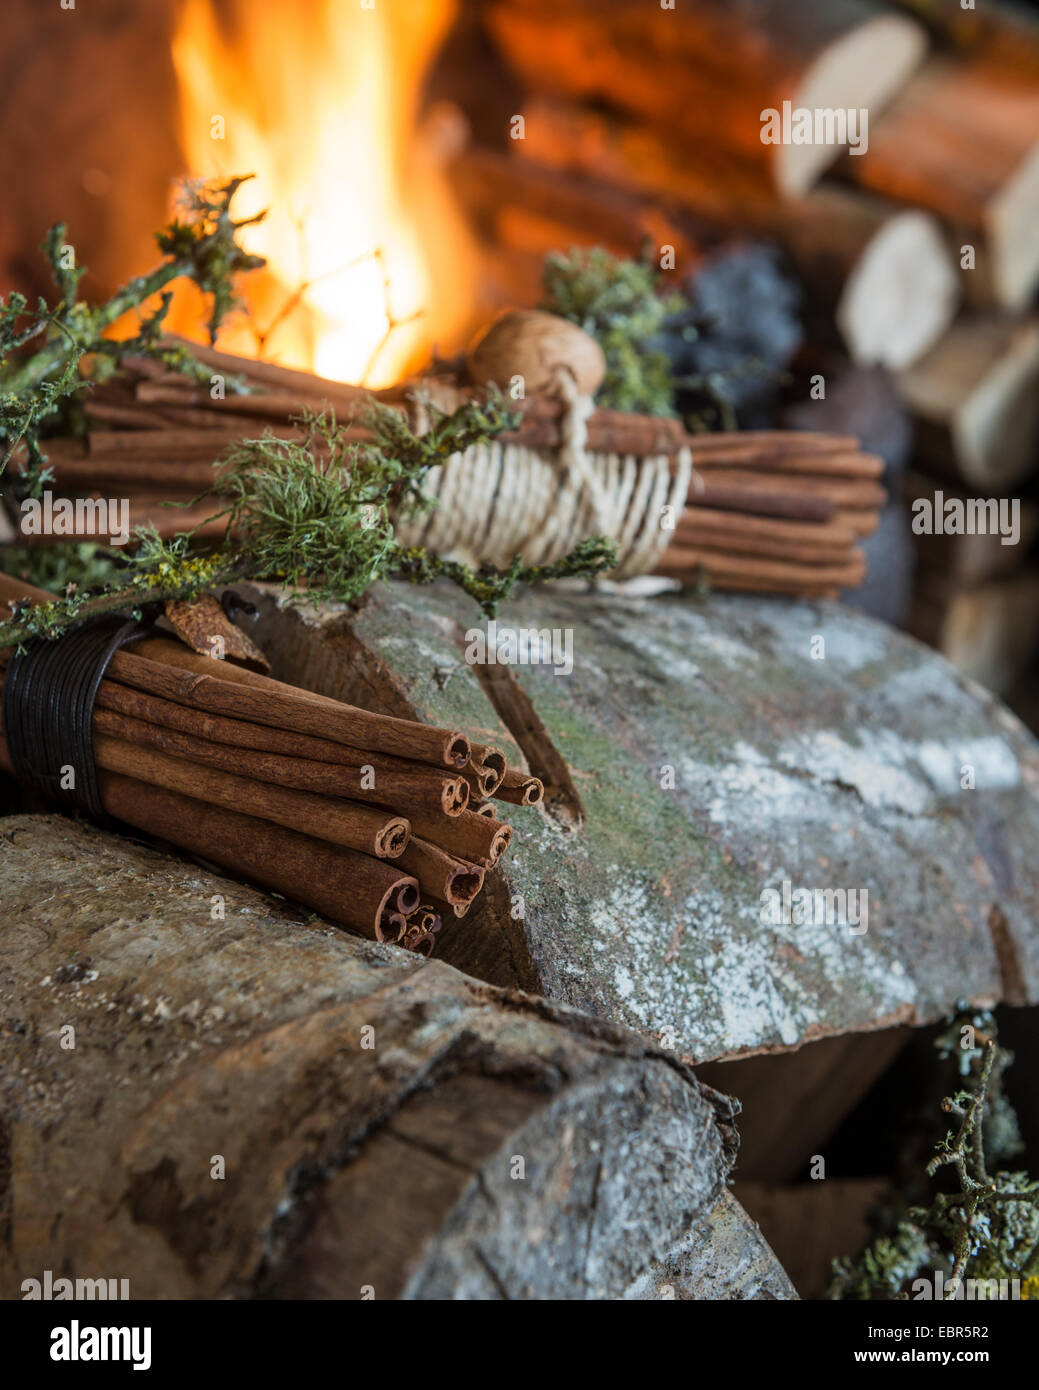 Bundles of cinnamon sticks and logs in basket by the fire Stock Photo